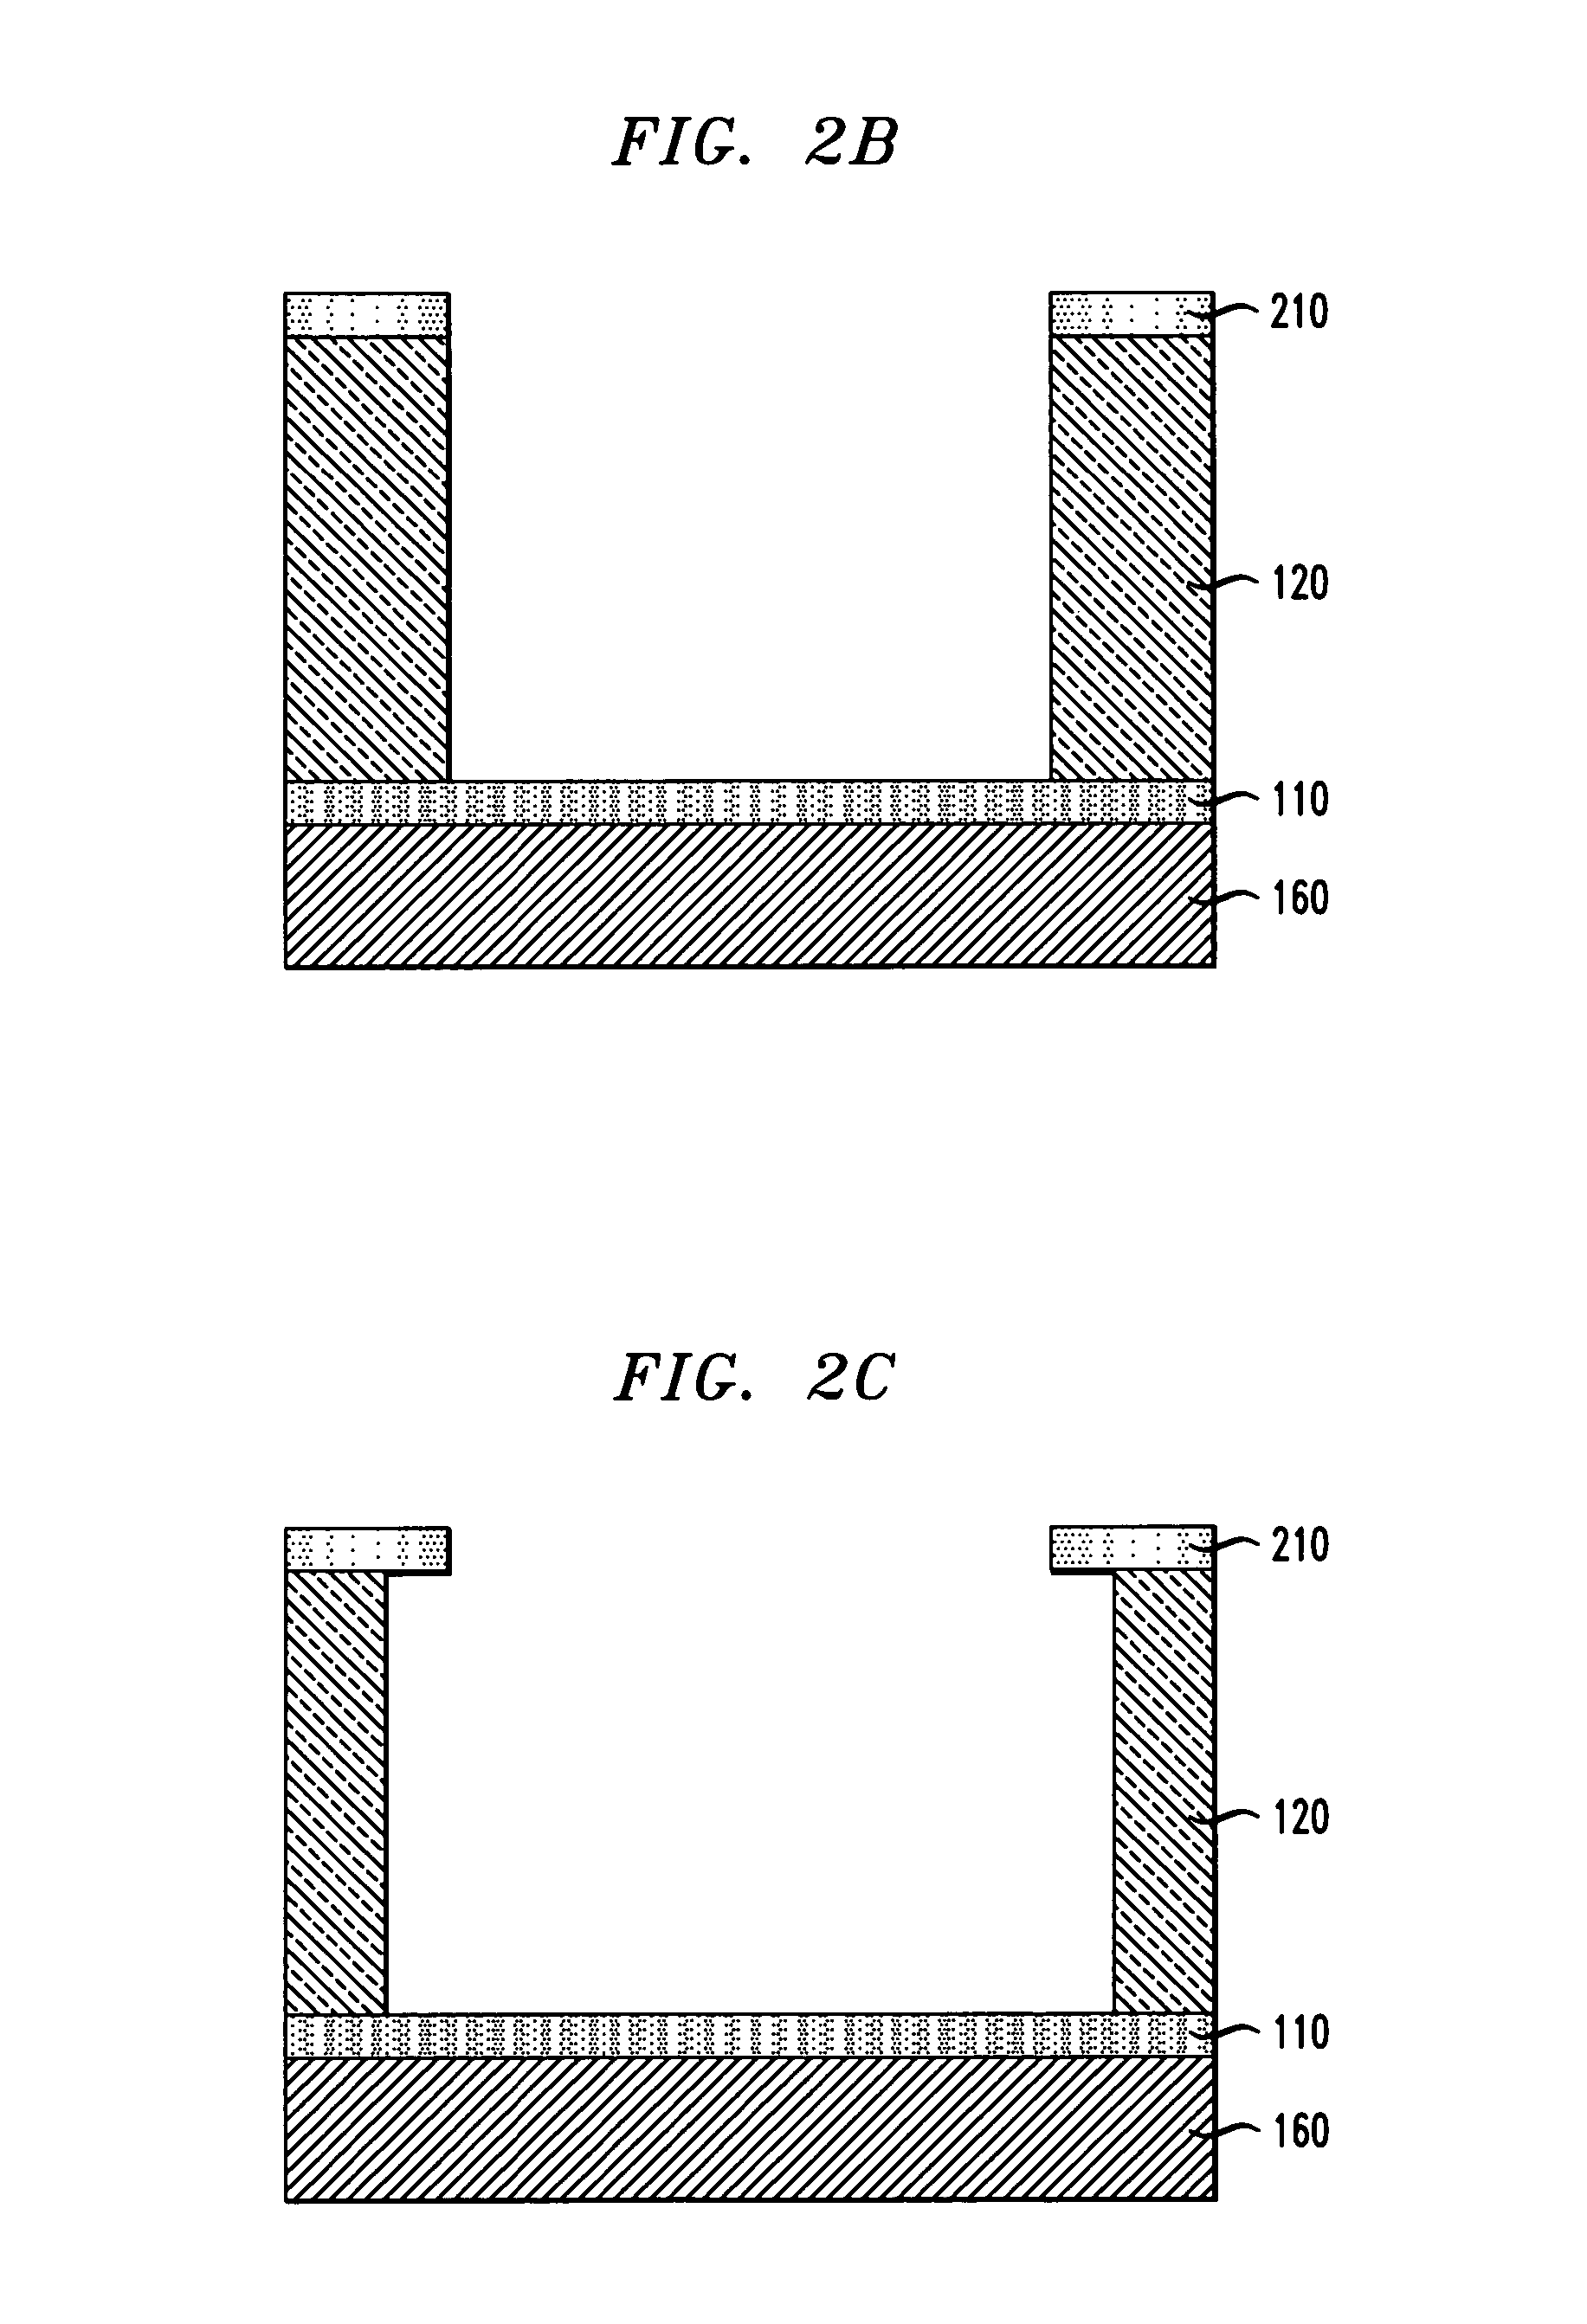 Phase change memory cell with limited switchable volume